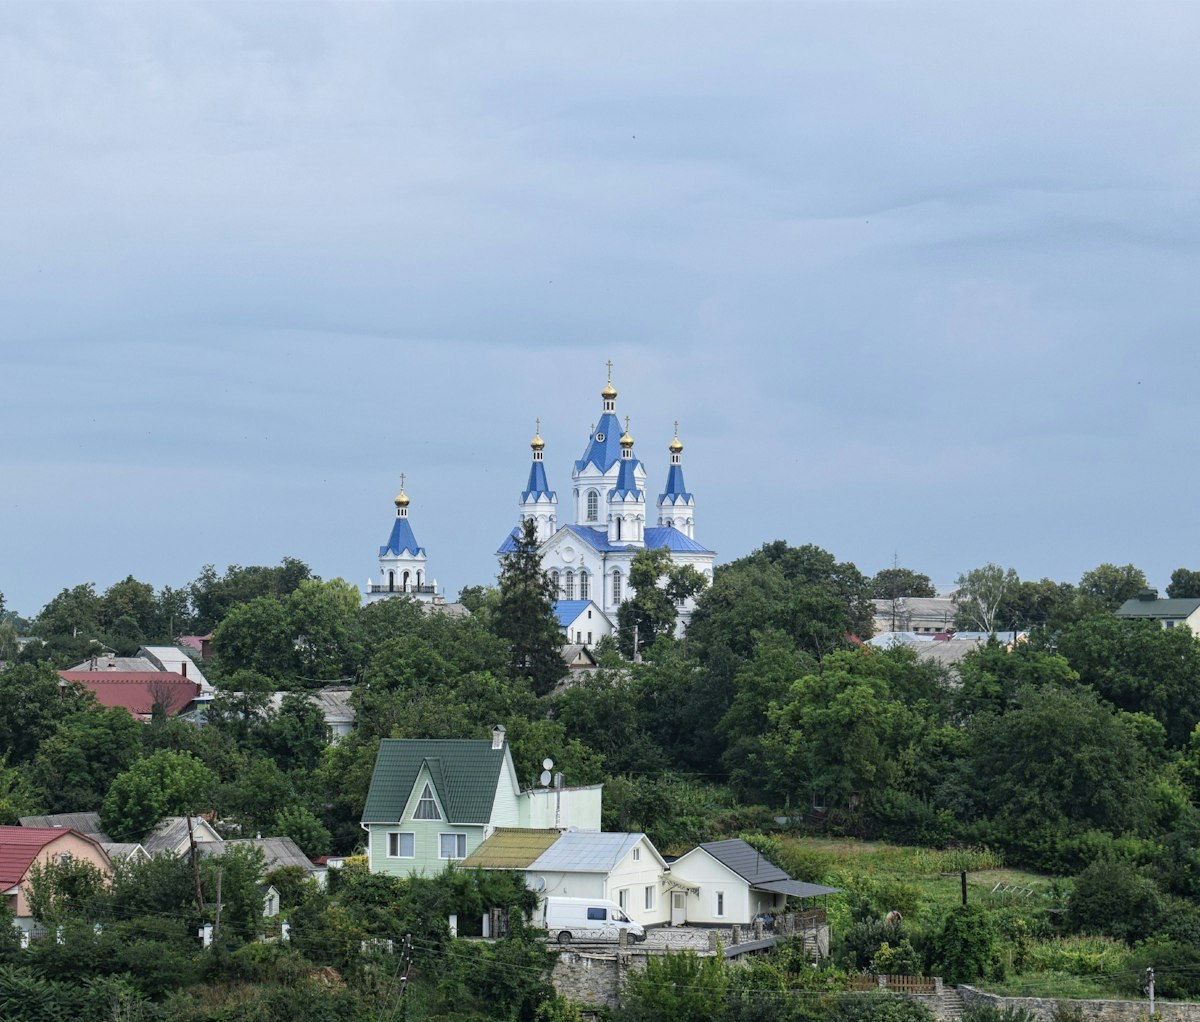 The towers of the Church of St George in Kamyanets-Podilsky.